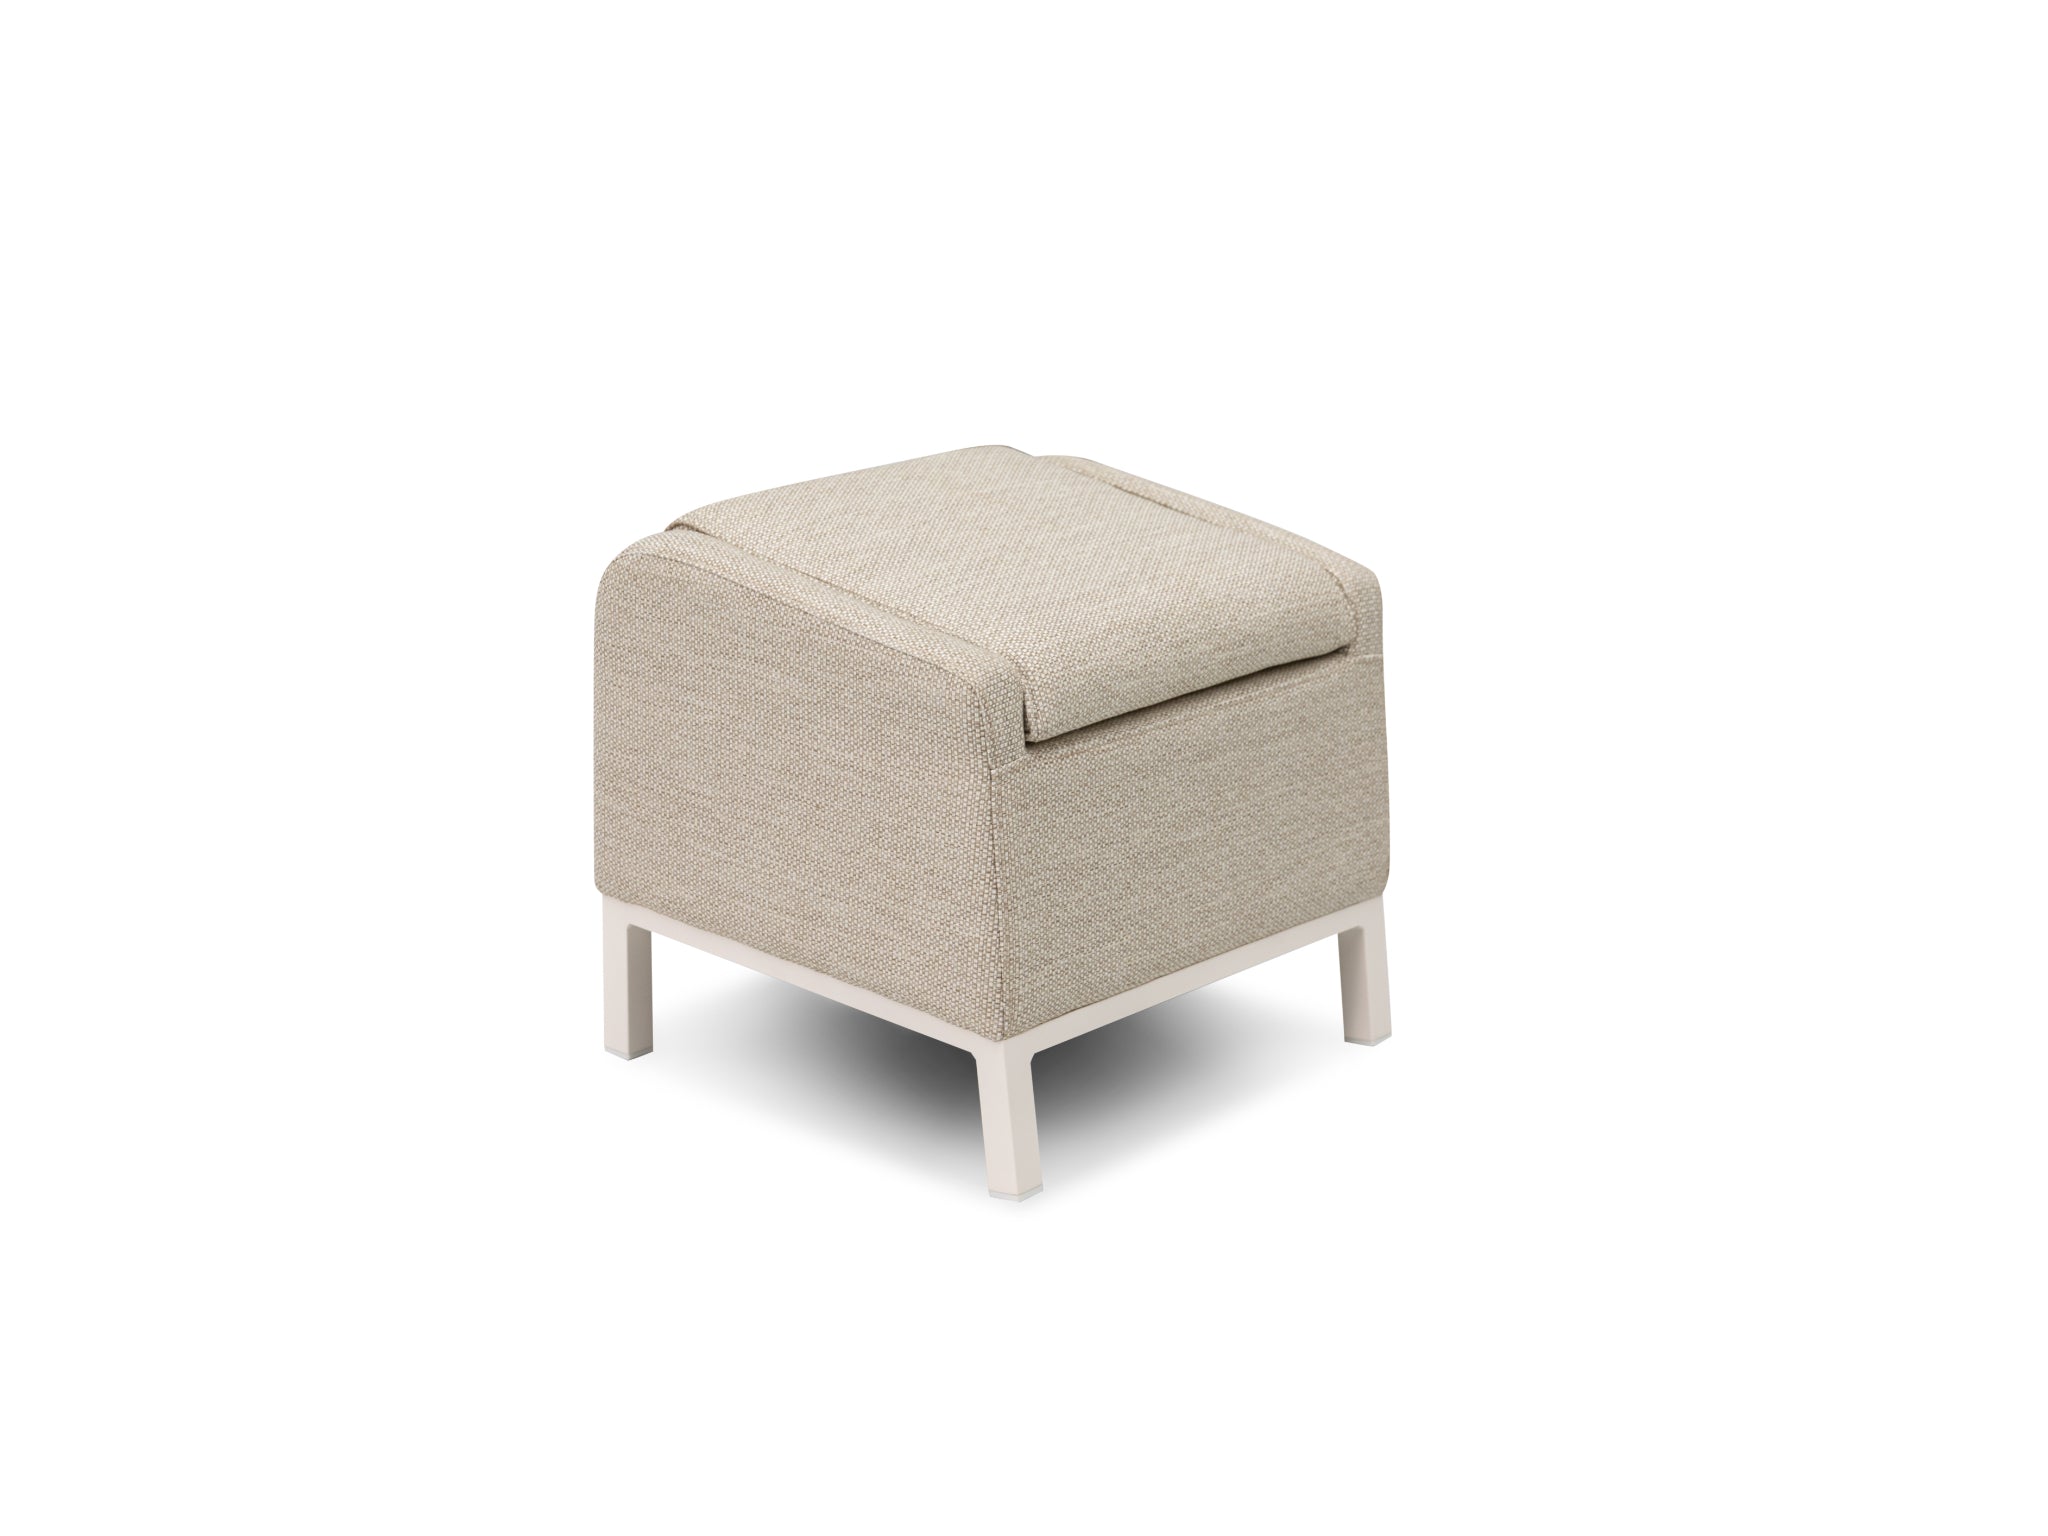 SIMPO by Sunlongarden Peter Footstool